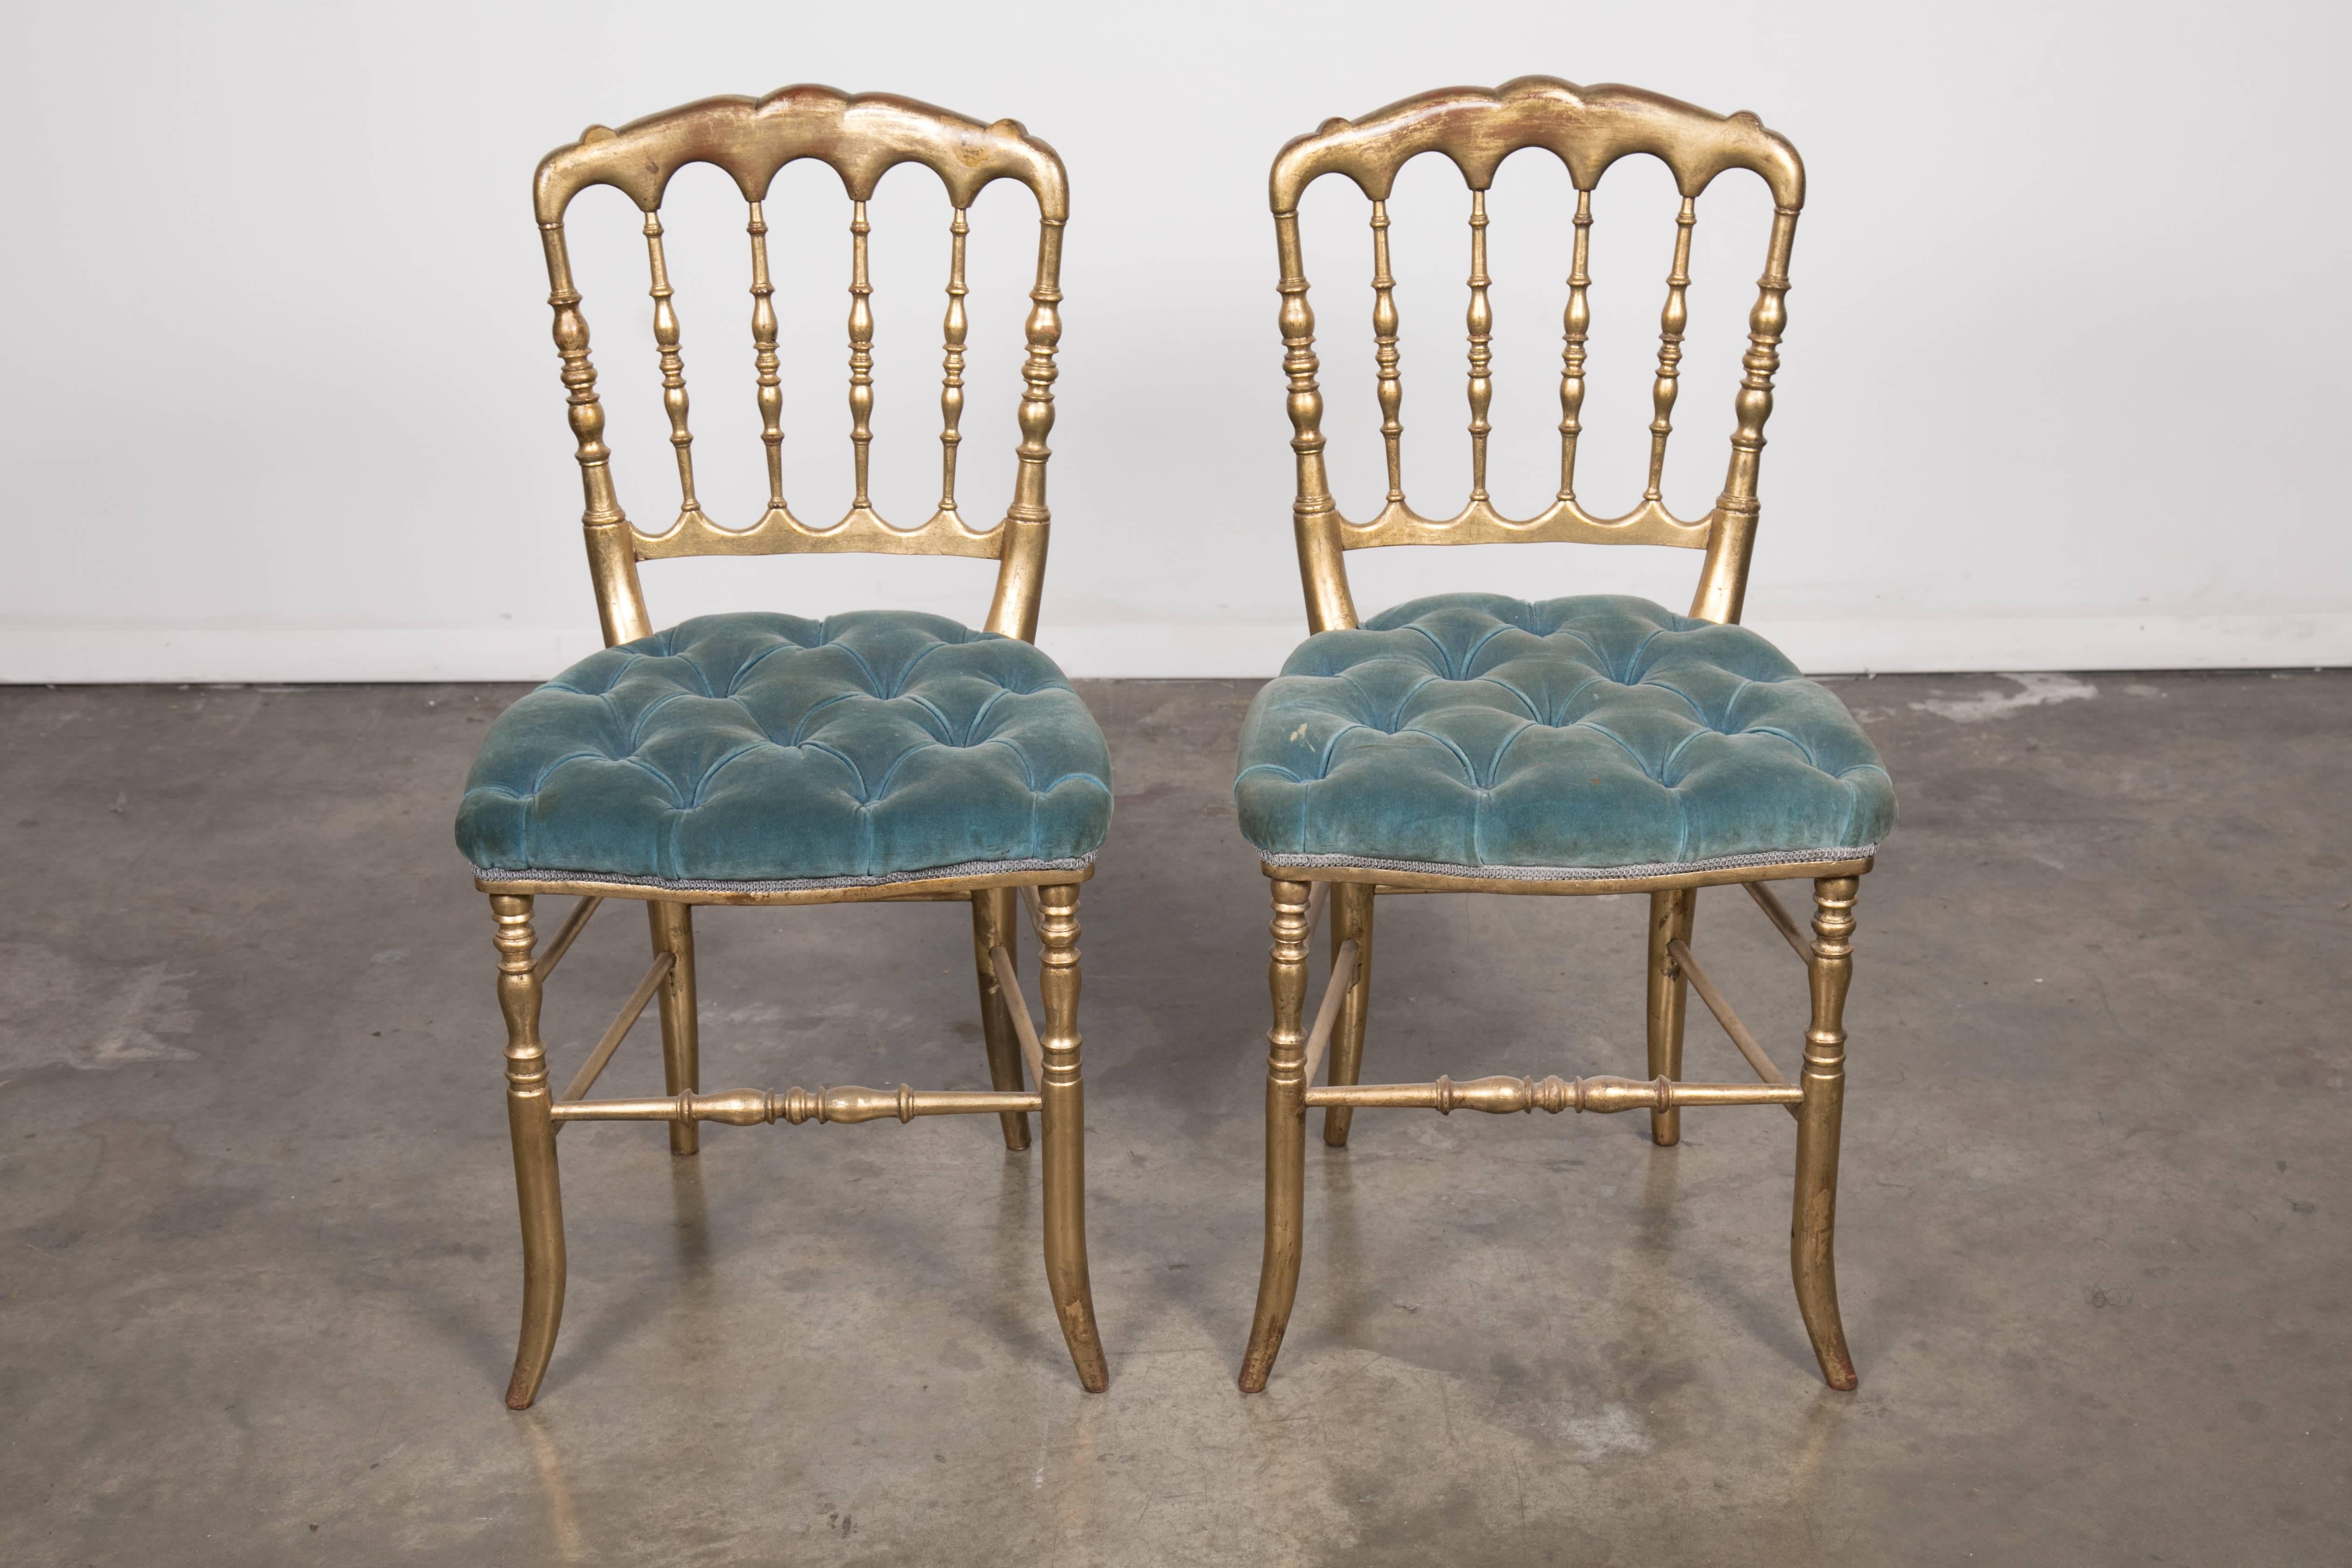 Lovely pair of 19th century Napoleon III gilded opera chairs with tufted seats, Paris, circa 1860s. Red oxidation showing through the beautiful water gilded patina that is original to the chairs. Solid and sturdy.